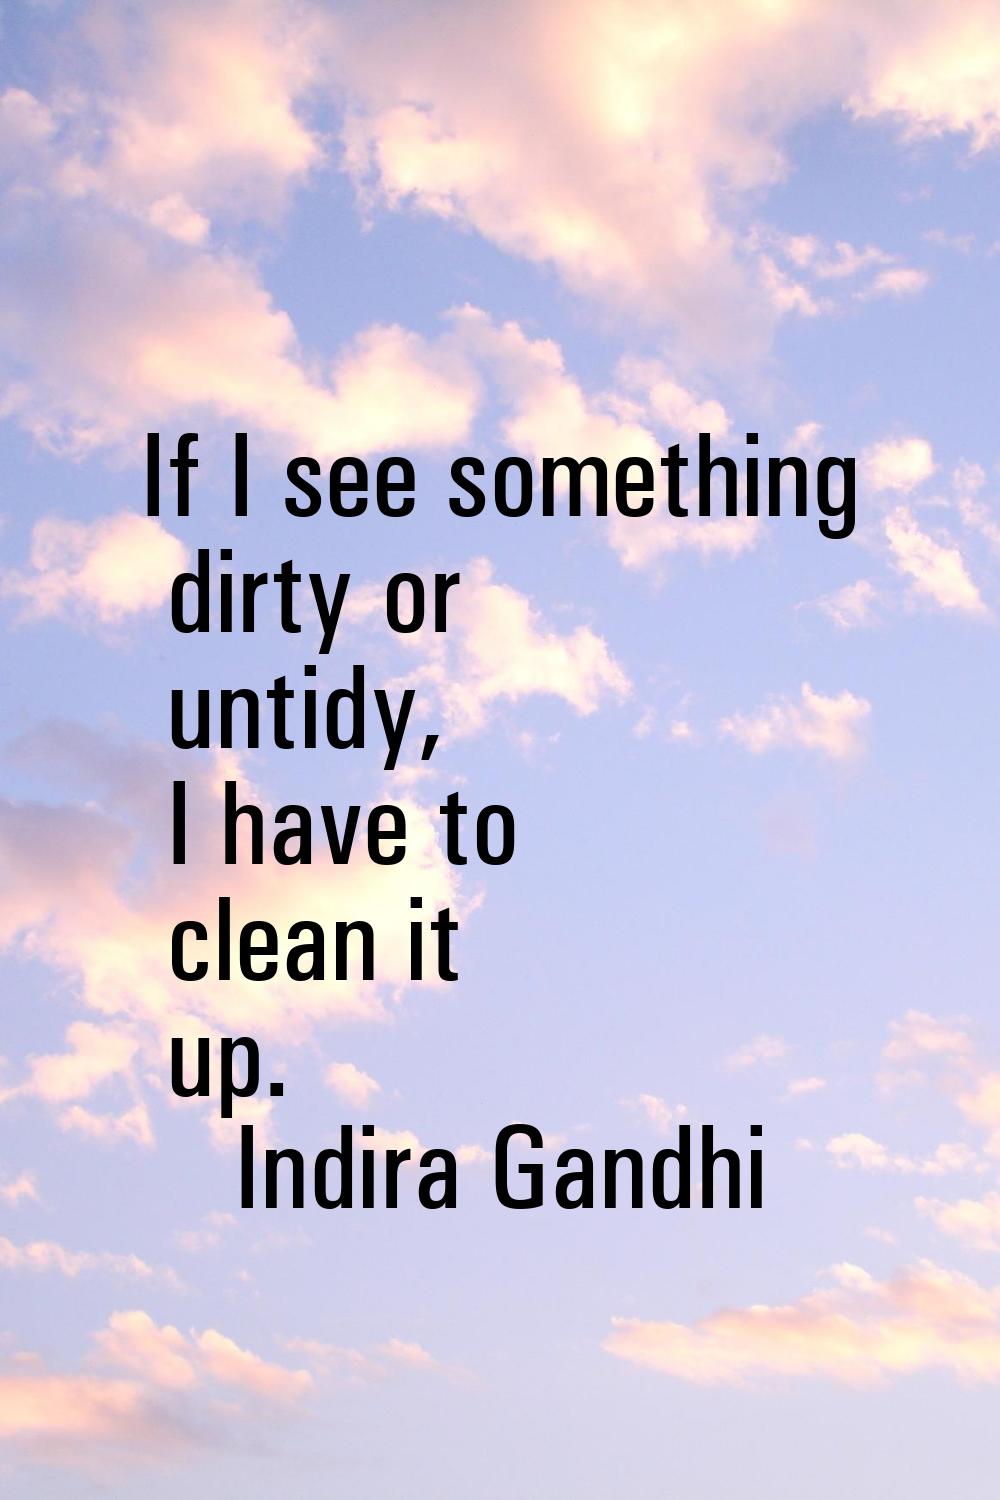 If I see something dirty or untidy, I have to clean it up.